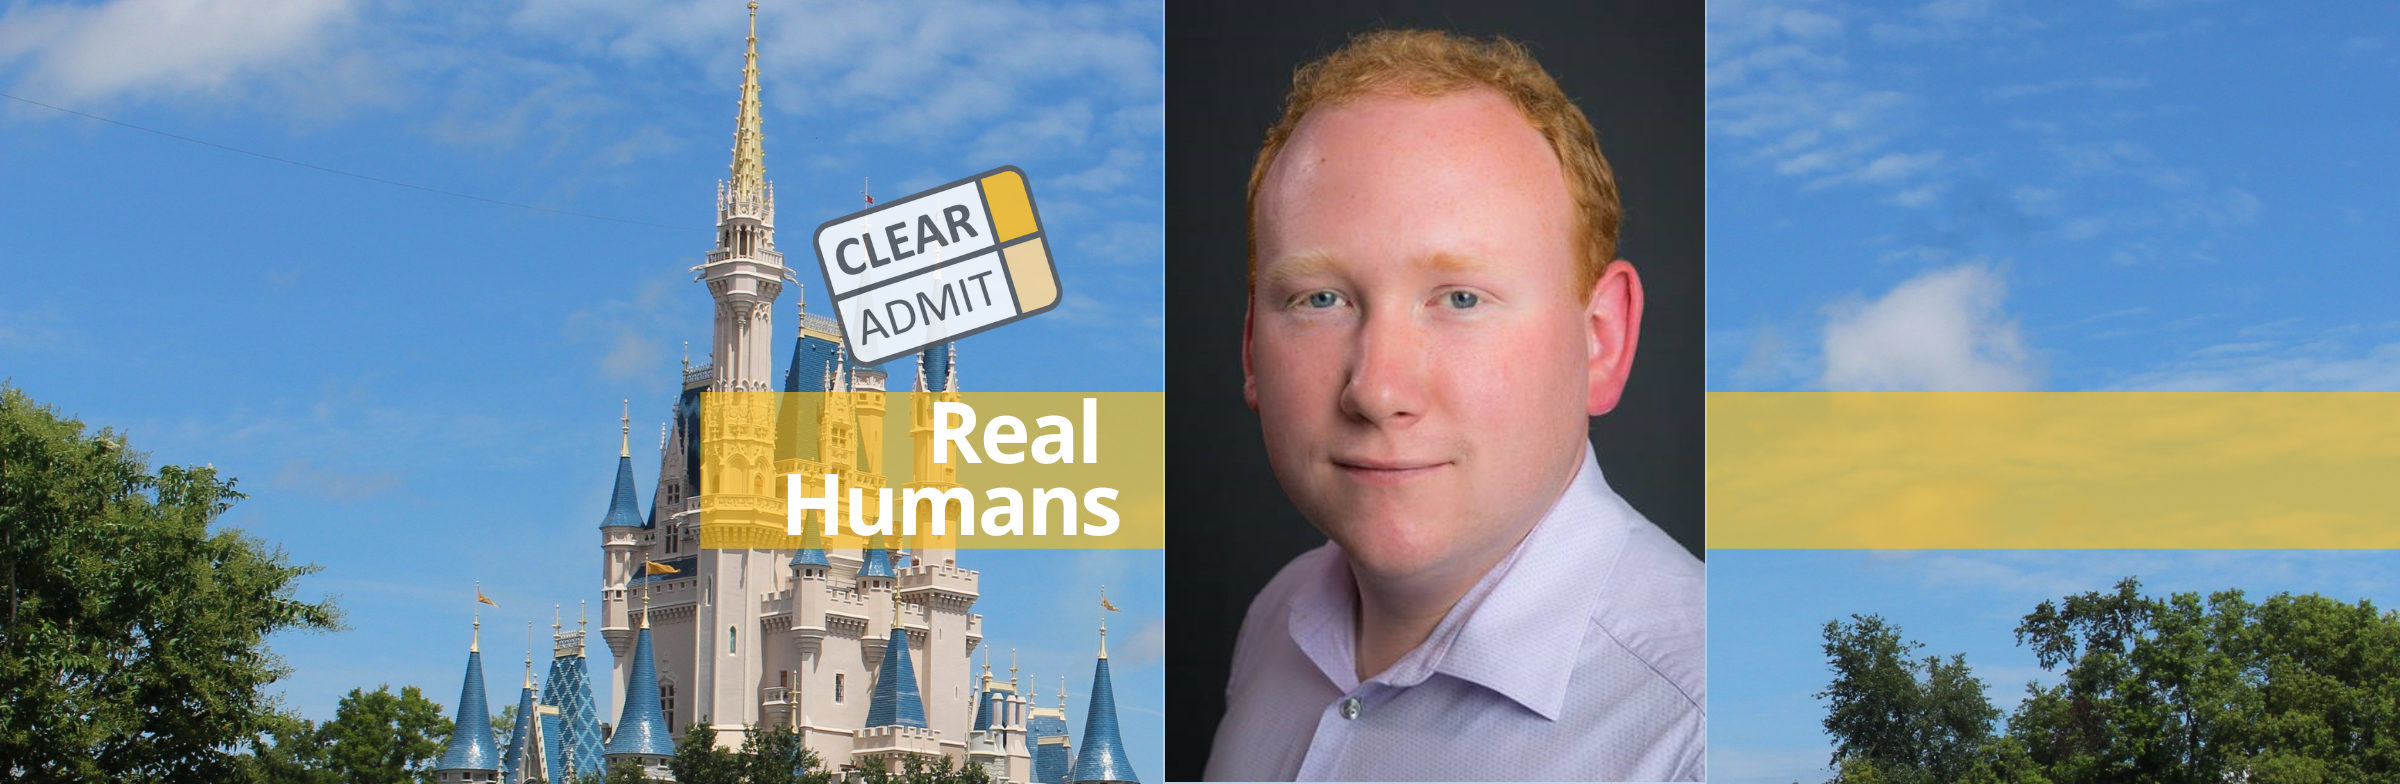 Image for Real Humans of Disney: Patrick Hynes, Georgetown McDonough ’18, Manager, Technology and Data Engineering